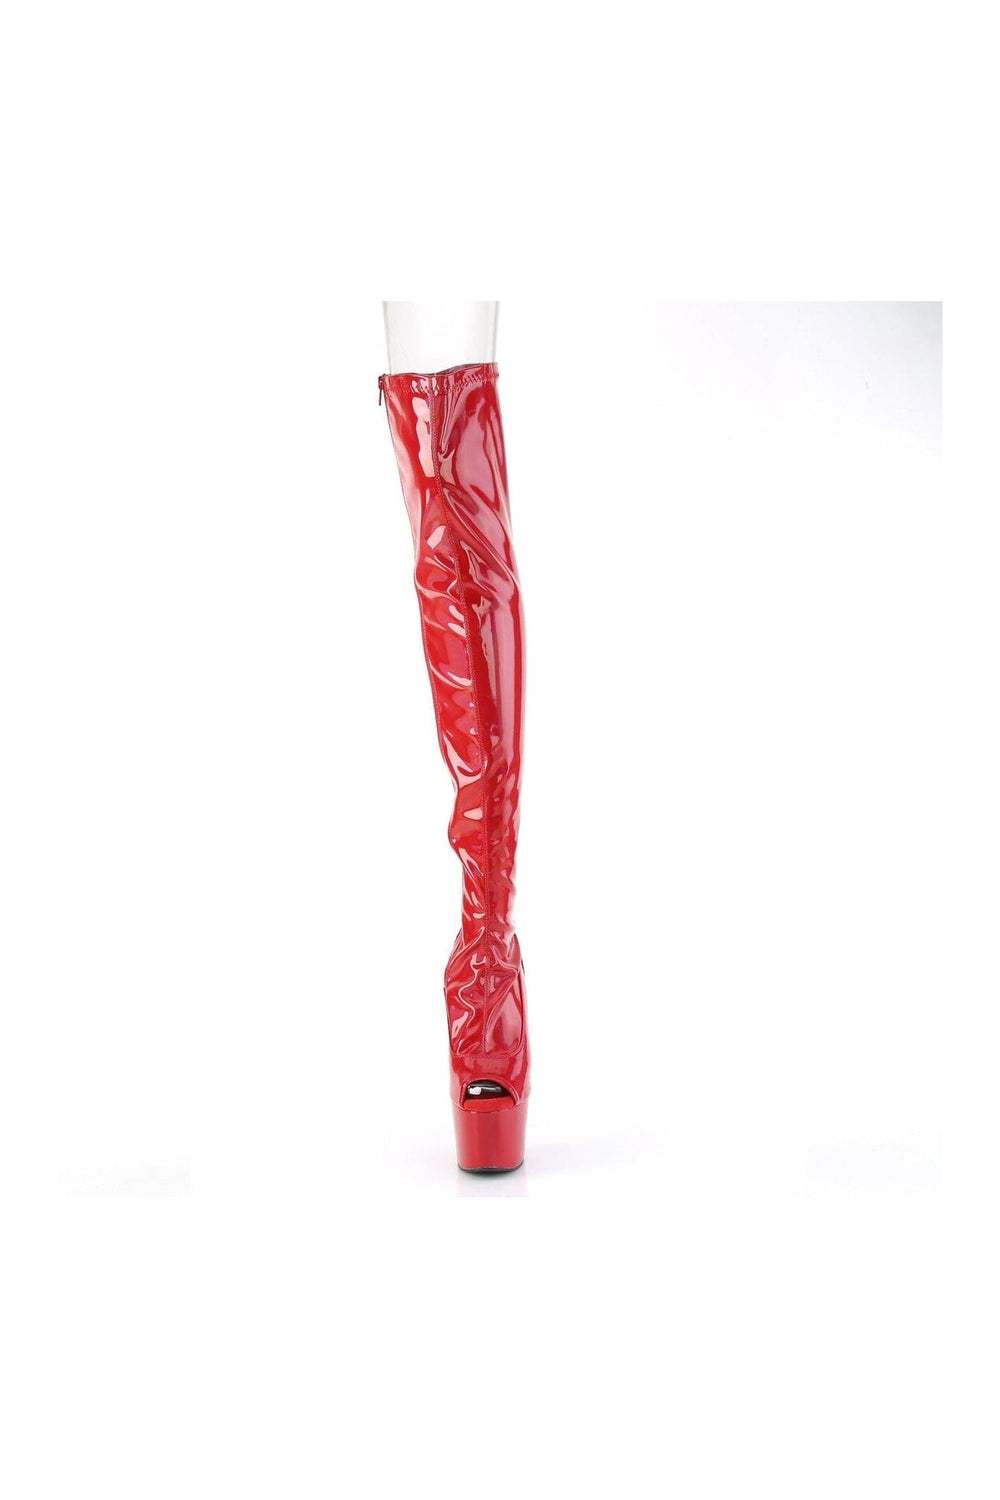 ADORE-3011HWR Red Hologram Thigh Boot-Thigh Boots-Pleaser-SEXYSHOES.COM